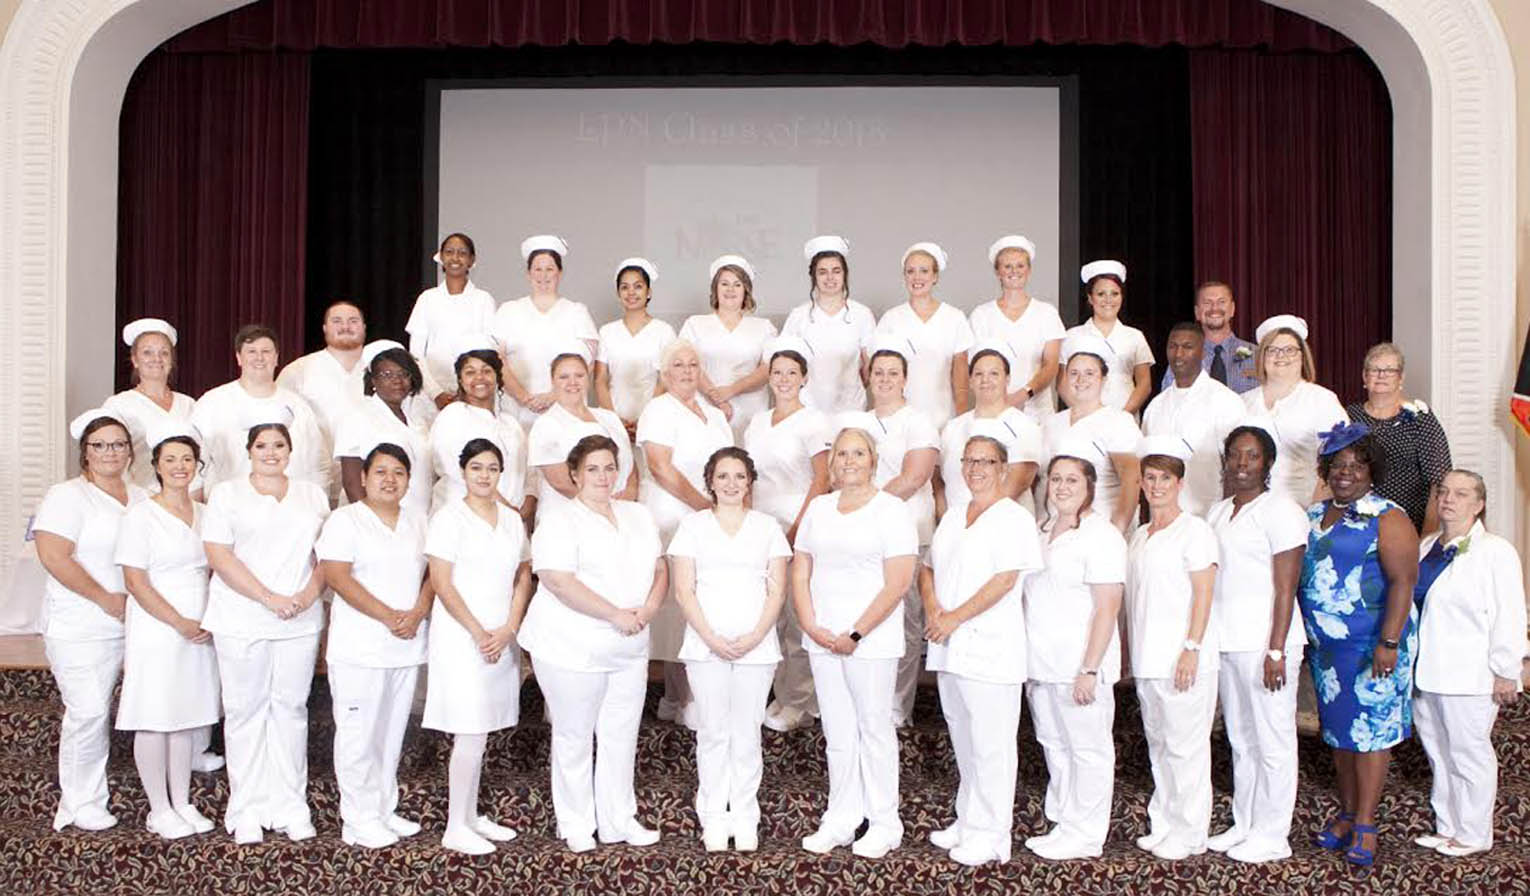 Click to enlarge,  The Central Carolina Community College Louise L. Tuller School of Nursing Practical Nursing program held a Pinning and Candle Lighting Ceremony for the Class of 2018 on Monday, July 23, at Campbell University's Turner Auditorium. 